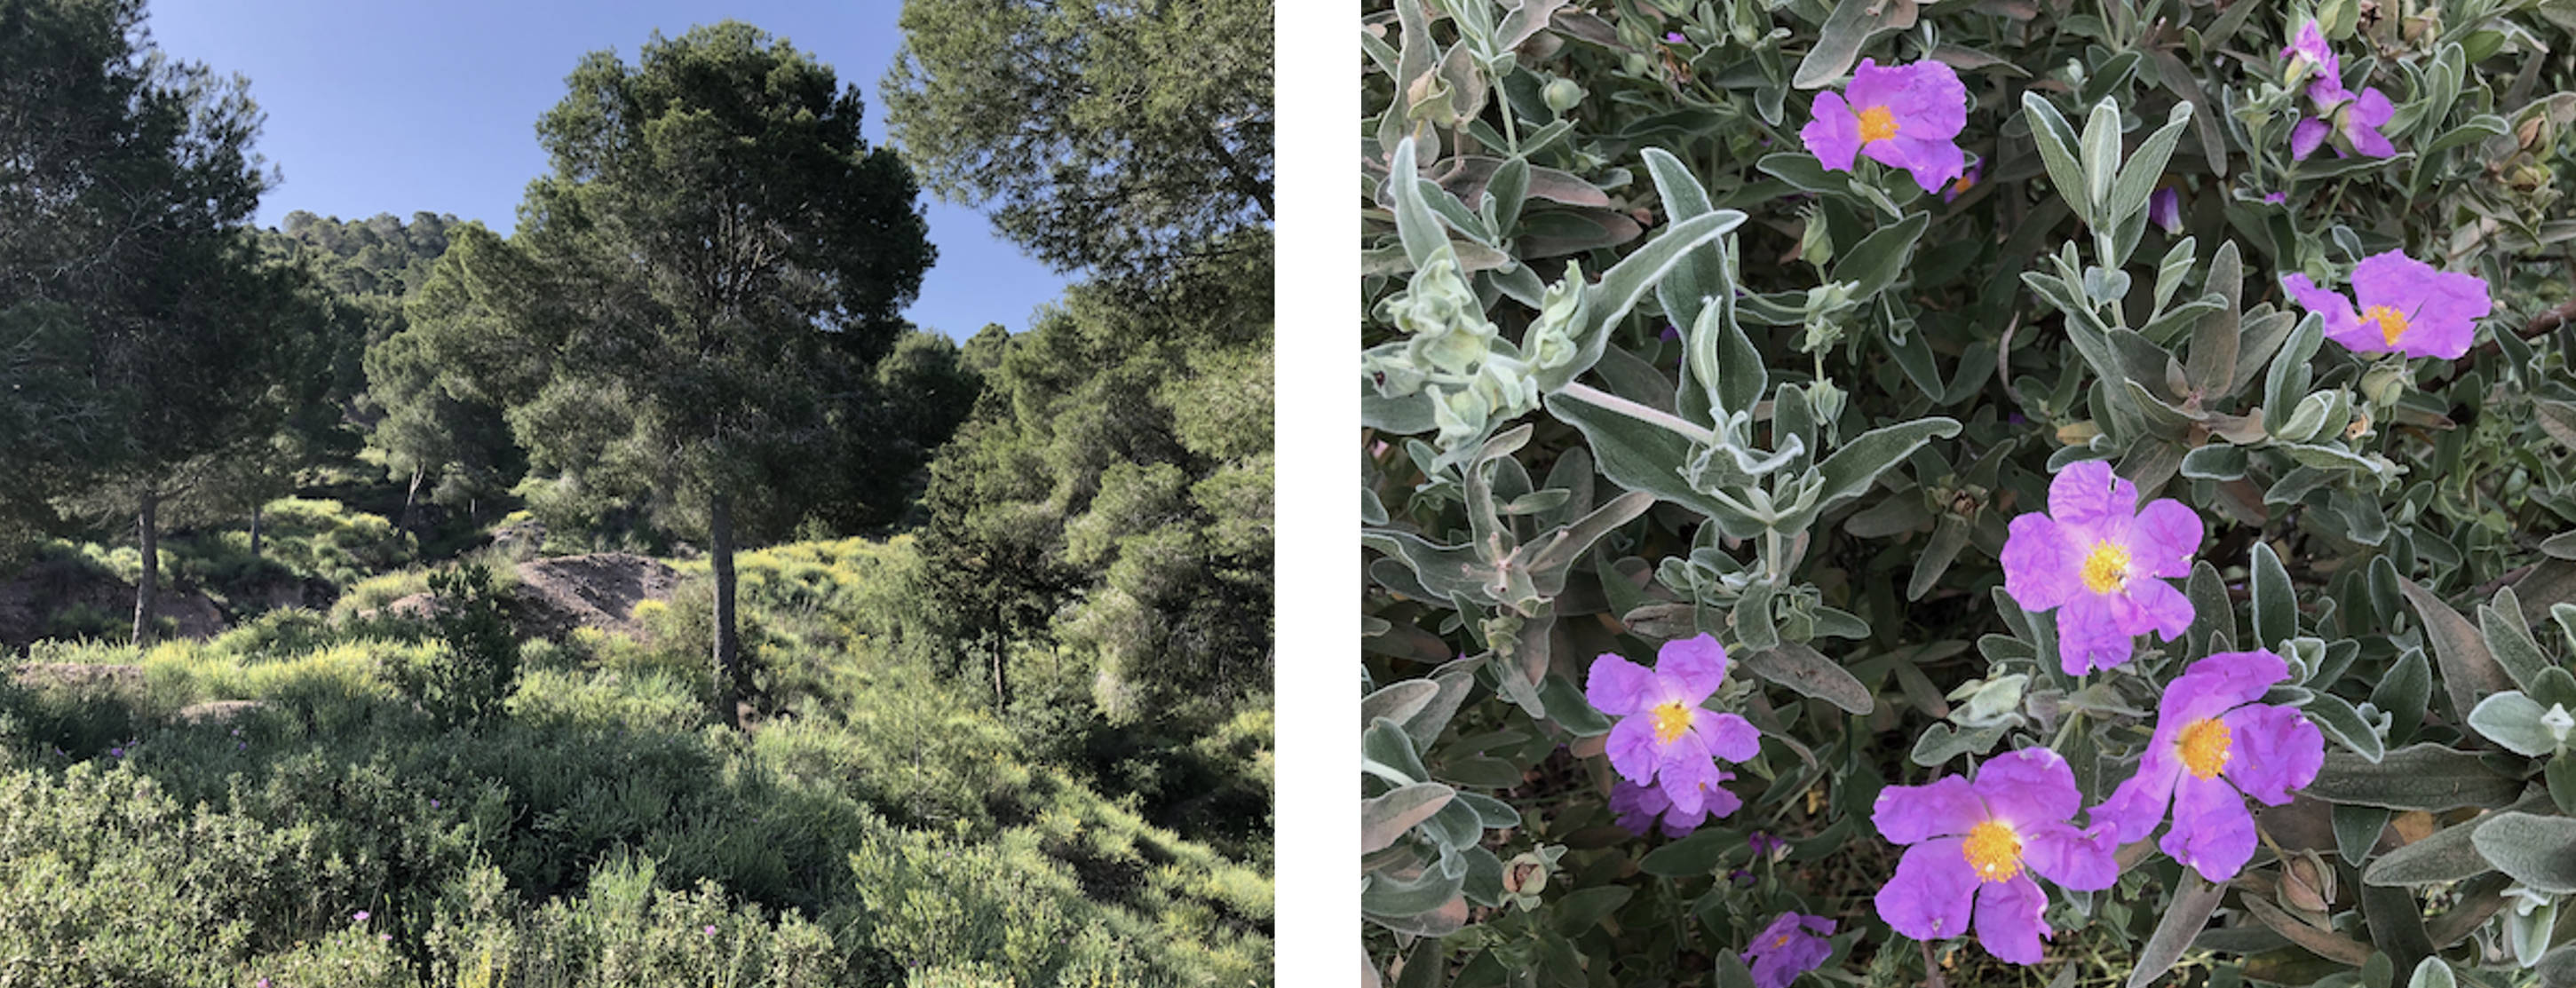 Typical  Mediterranean  landscape  with  a  predominance  of  C.  albidus,  called  jaral  (left).  Detail of flowers and leaves of C. albidus in spring (right).